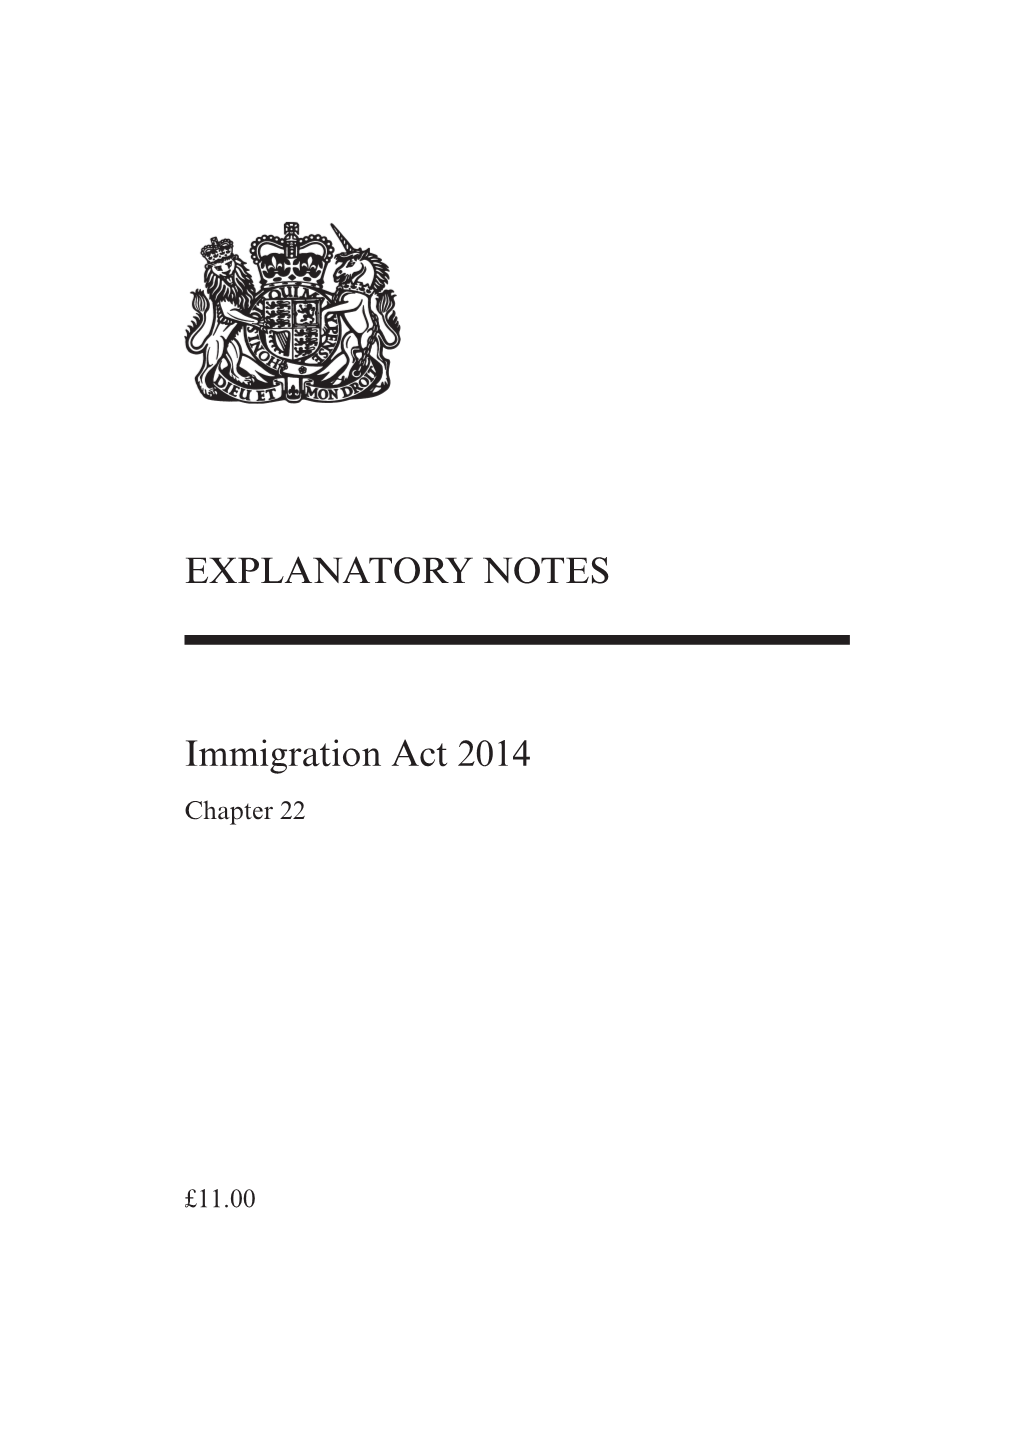 EXPLANATORY NOTES Immigration Act 2014